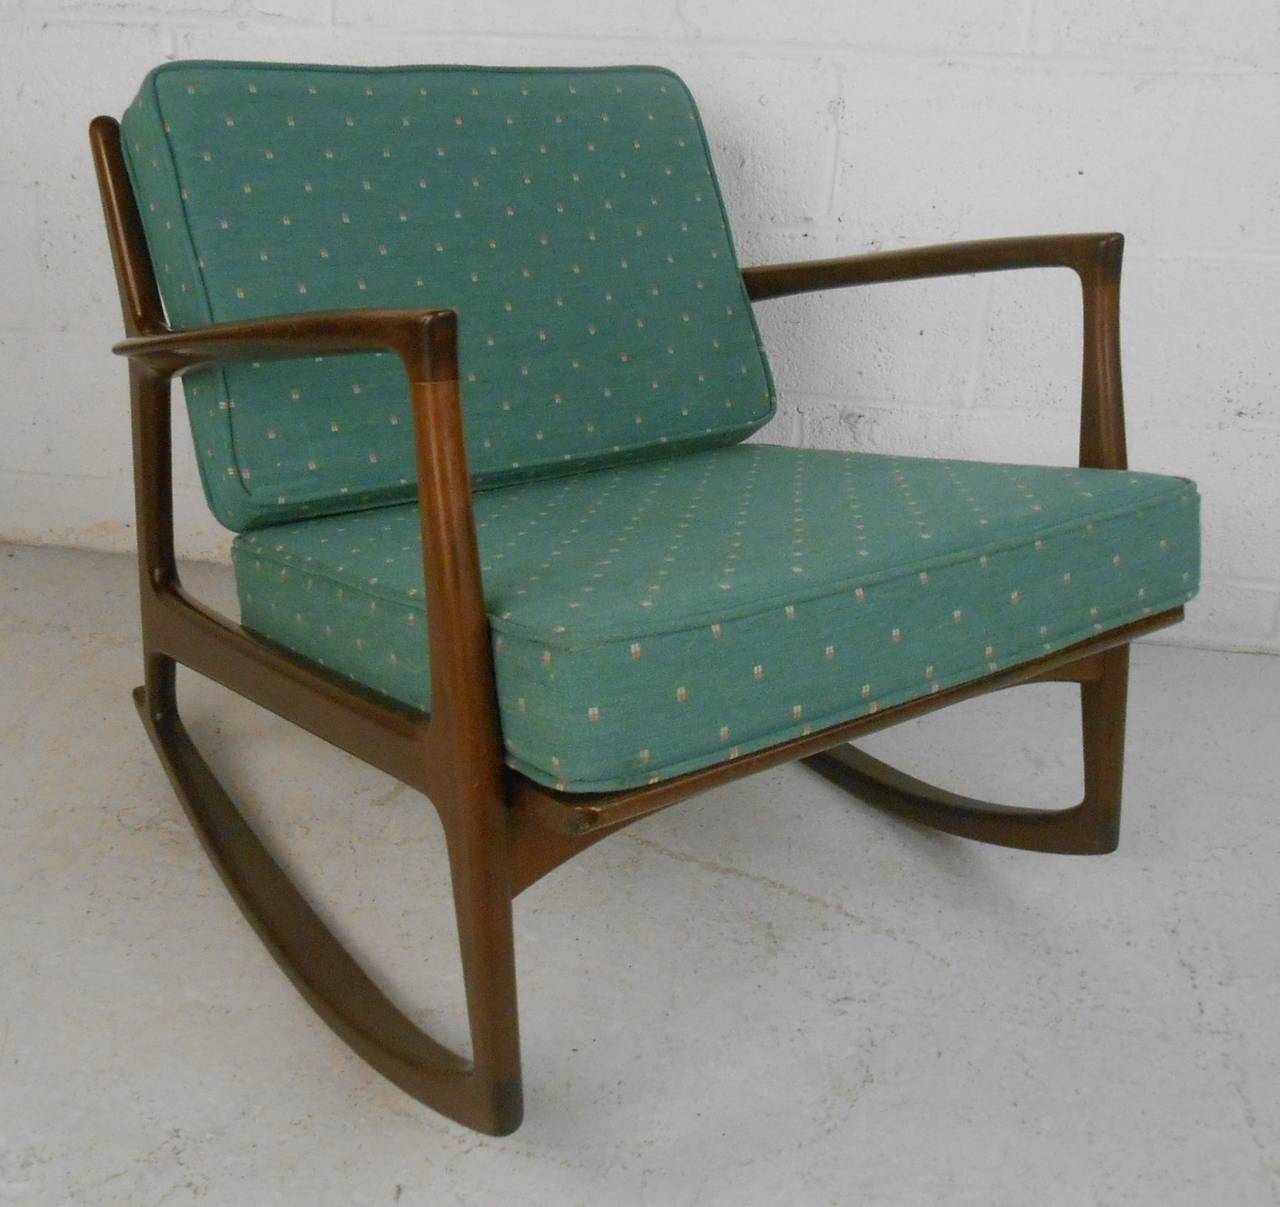 Comfortable and stylish rocker with walnut frame and upholstered seat & back. Please confirm item location (NY or NJ) with dealer.